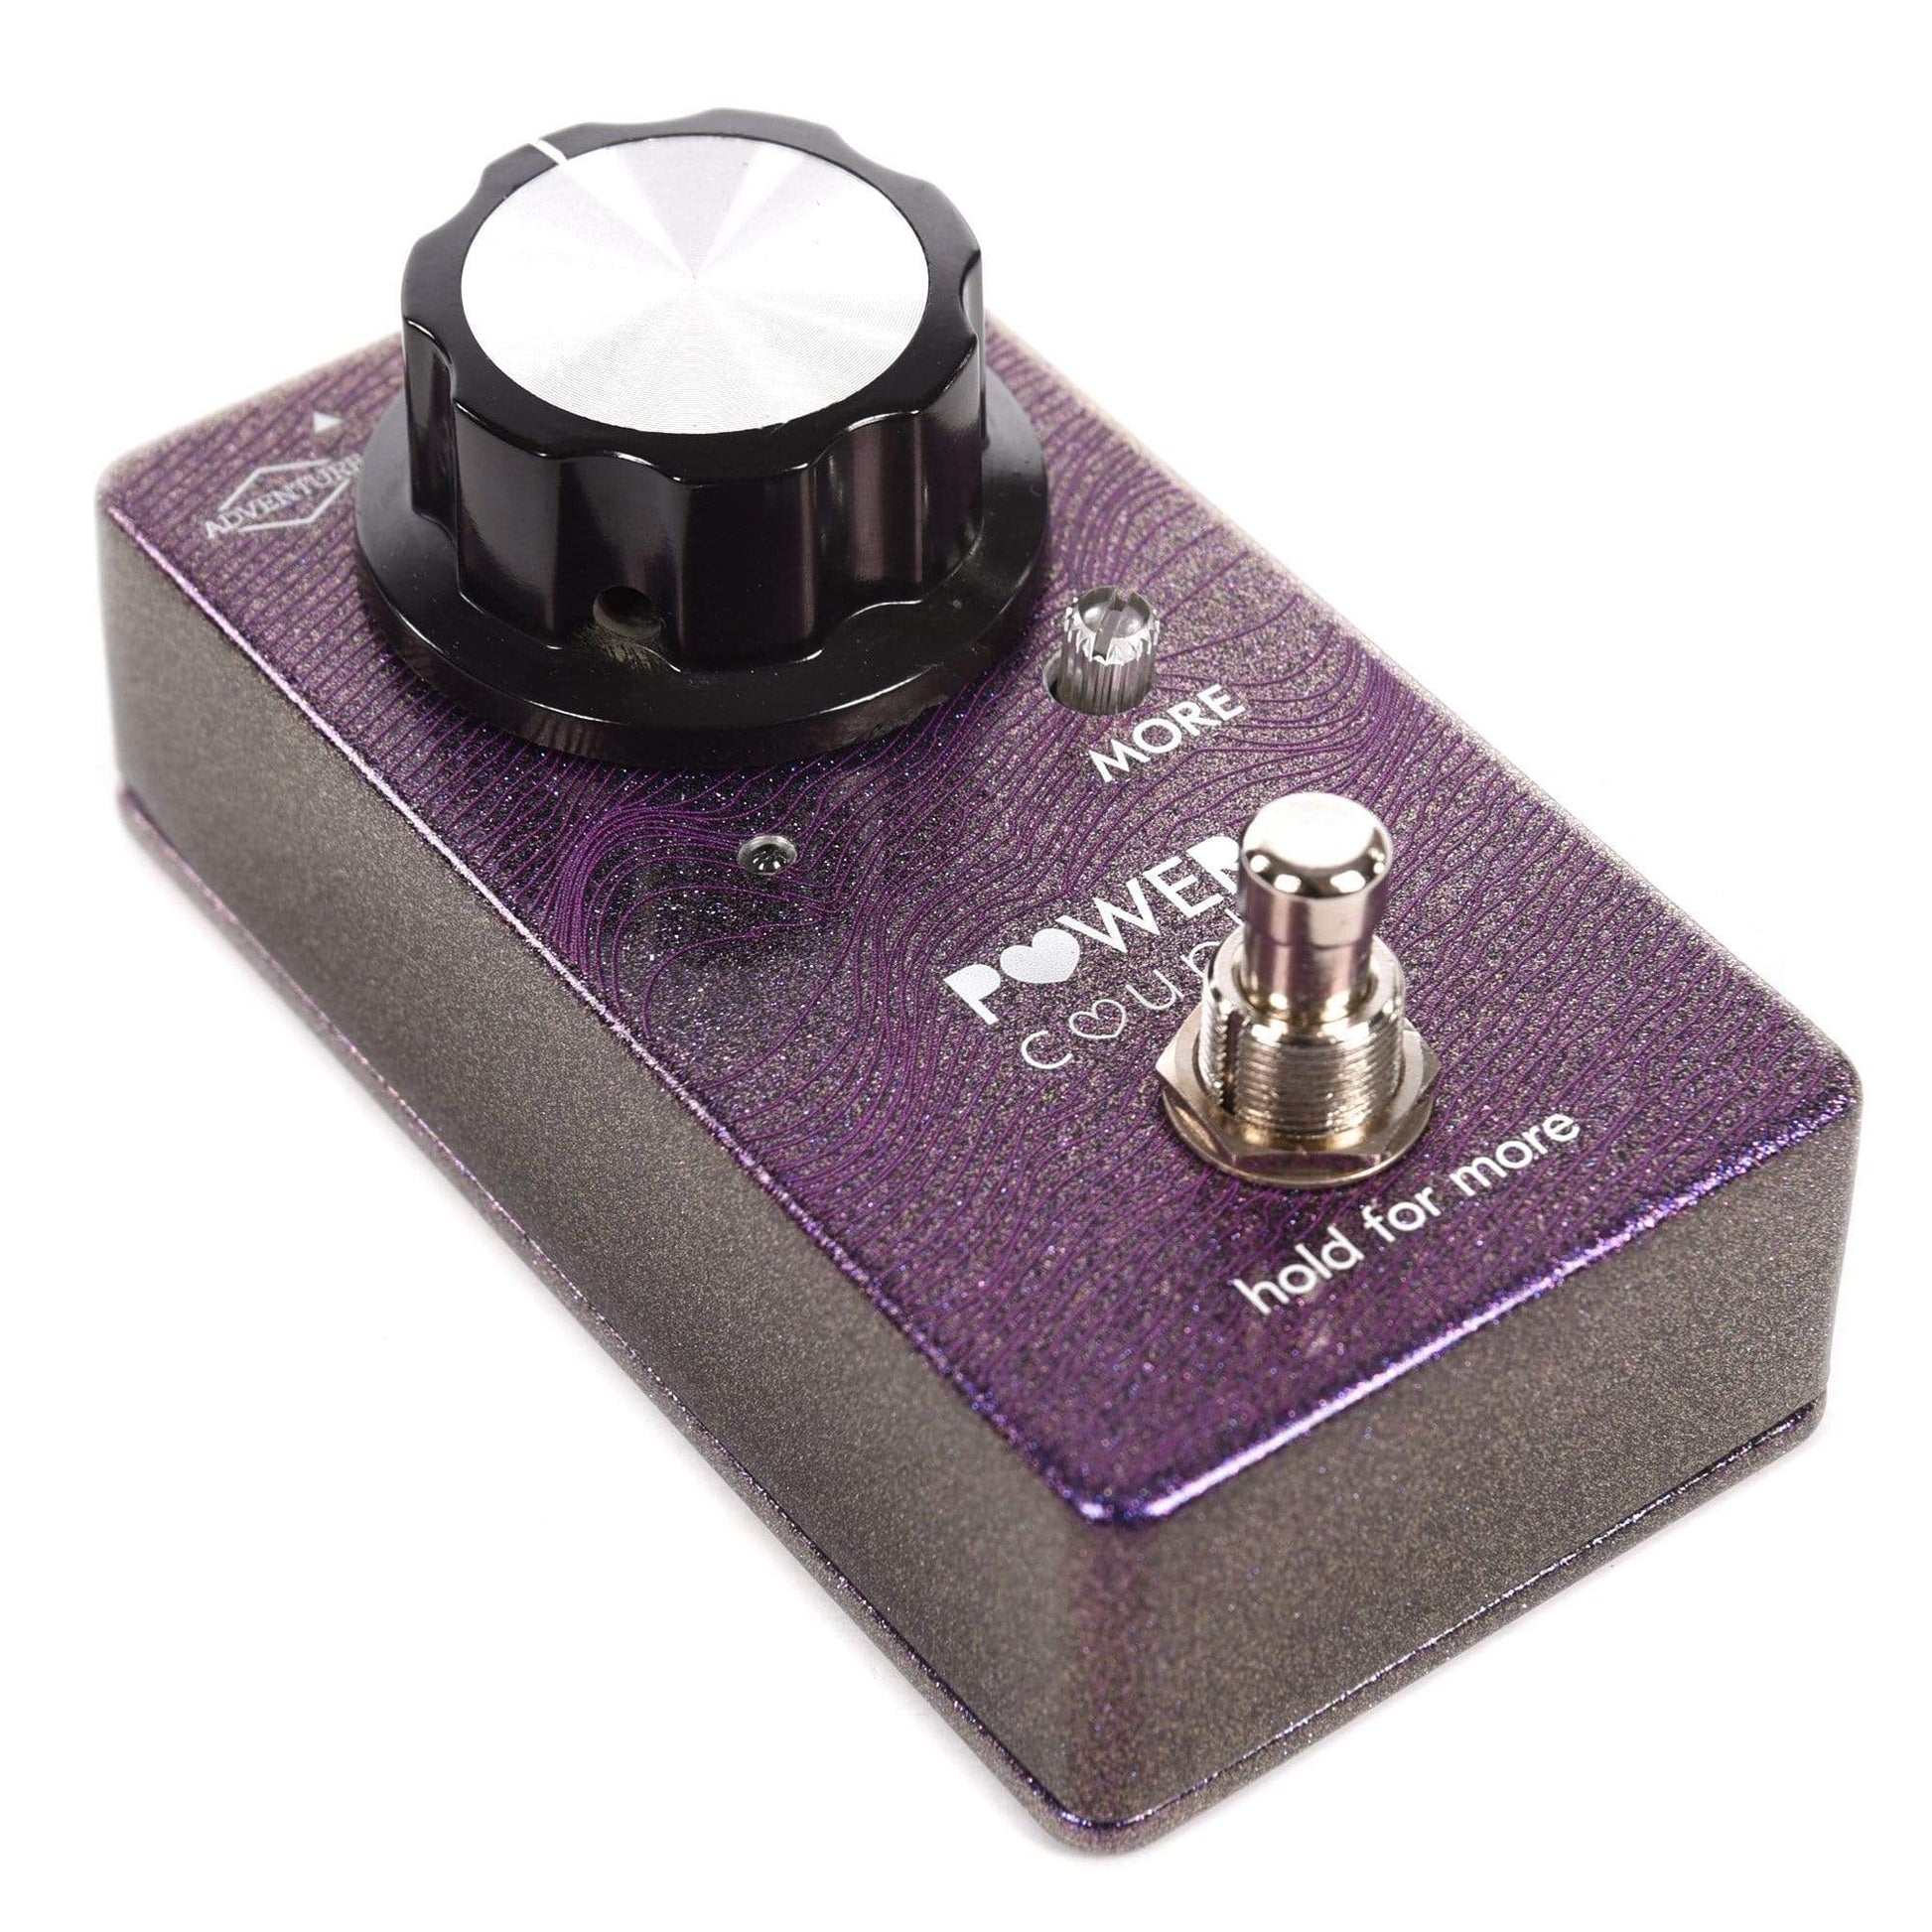 Adventure Audio Power Couple Double Boost Effects and Pedals / Overdrive and Boost